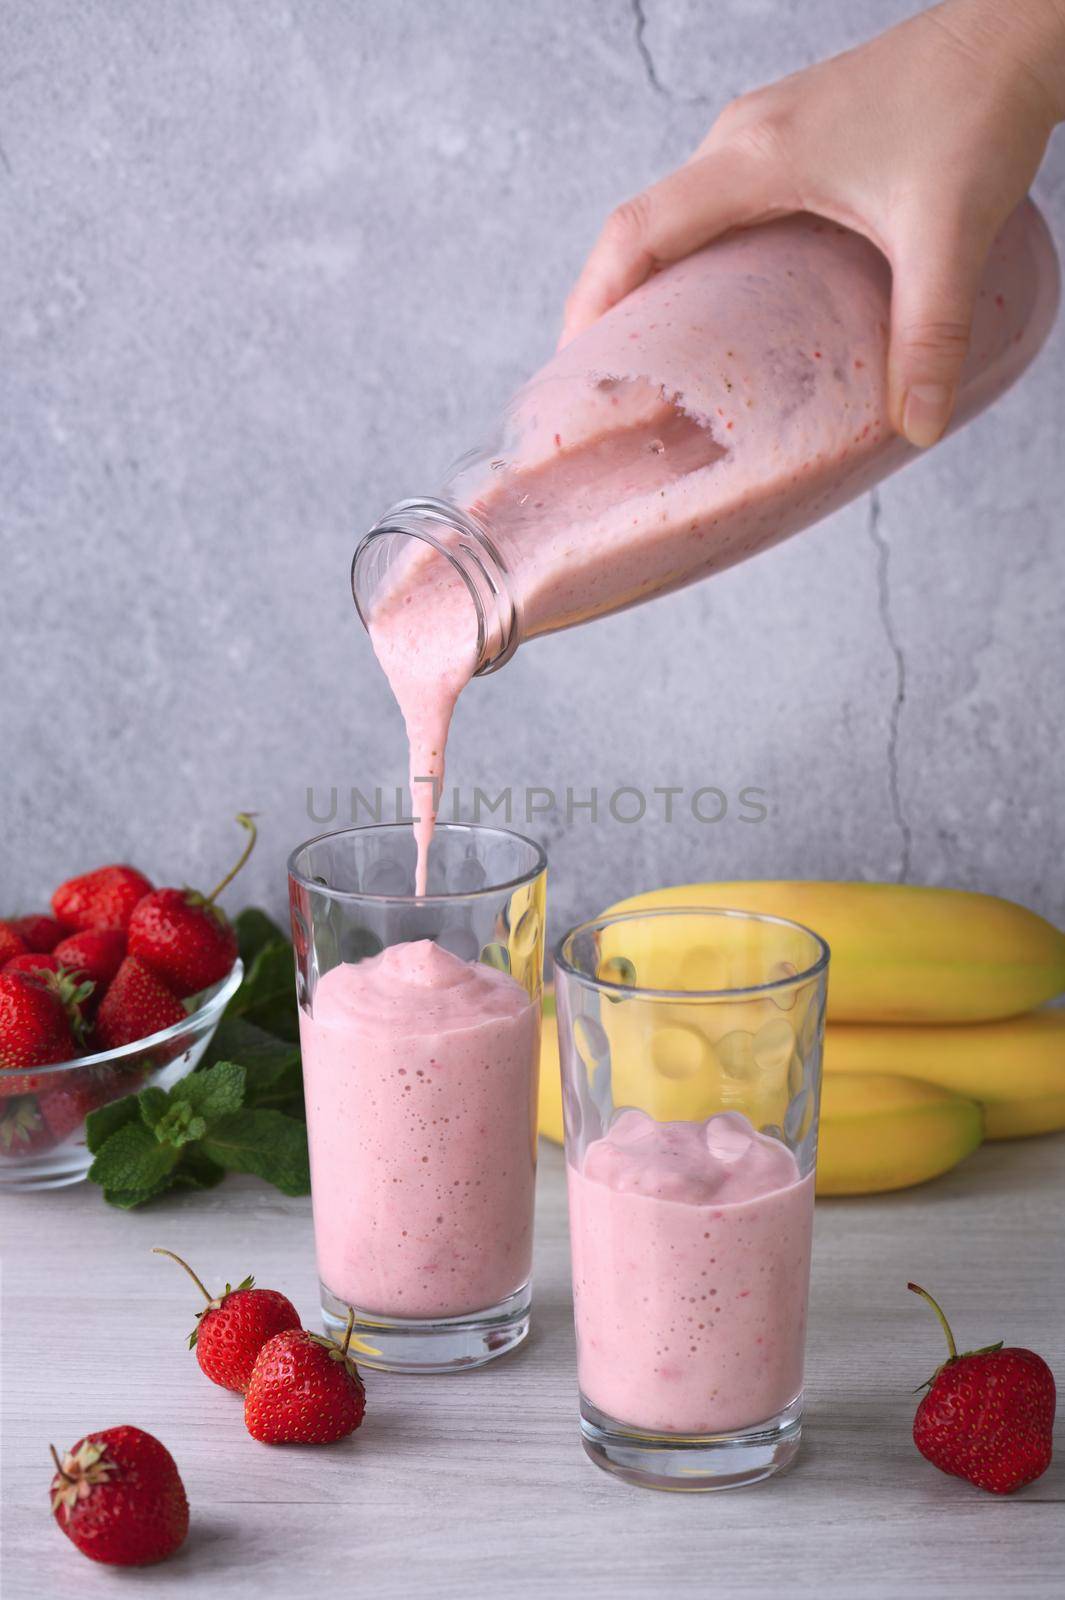 Freshly made banana-strawberry smoothie by Apolonia